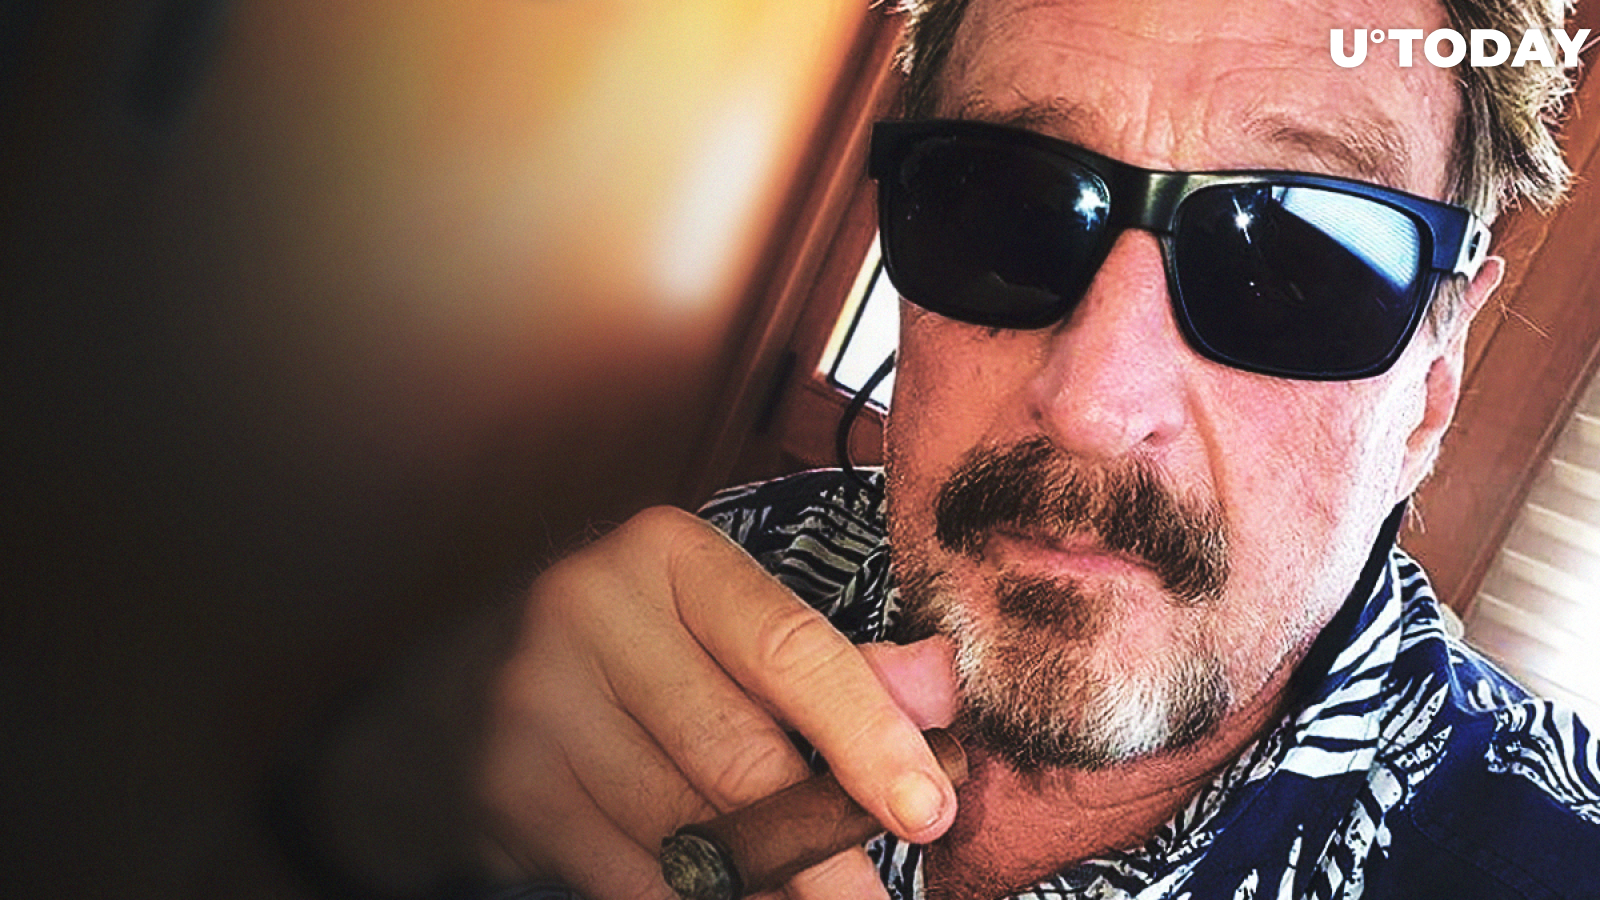 Crypto Baron John McAfee Claims He Put Up Show Together with CIA and Zombie Coin